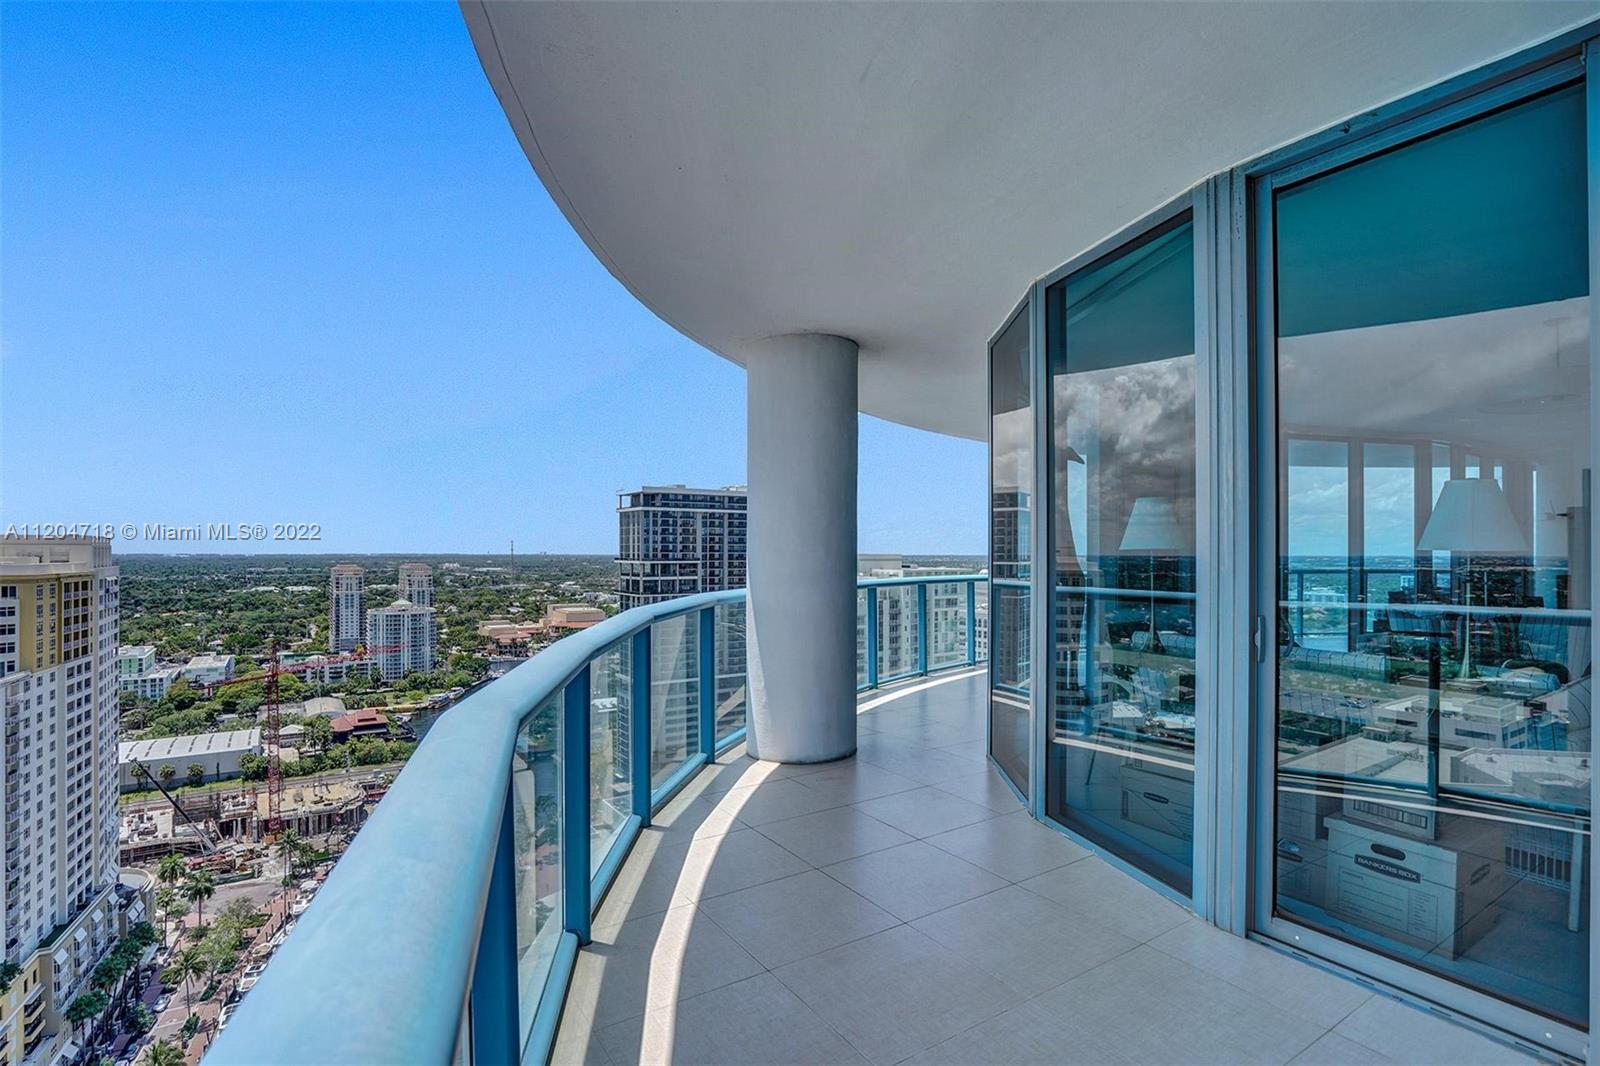 ENTER THE LUXURIOUS GLASS TOWER OF LAS OLAS RIVER HOUSE AND INDULGE IN AN ELEGANT LIFESTYLE AND $4M 